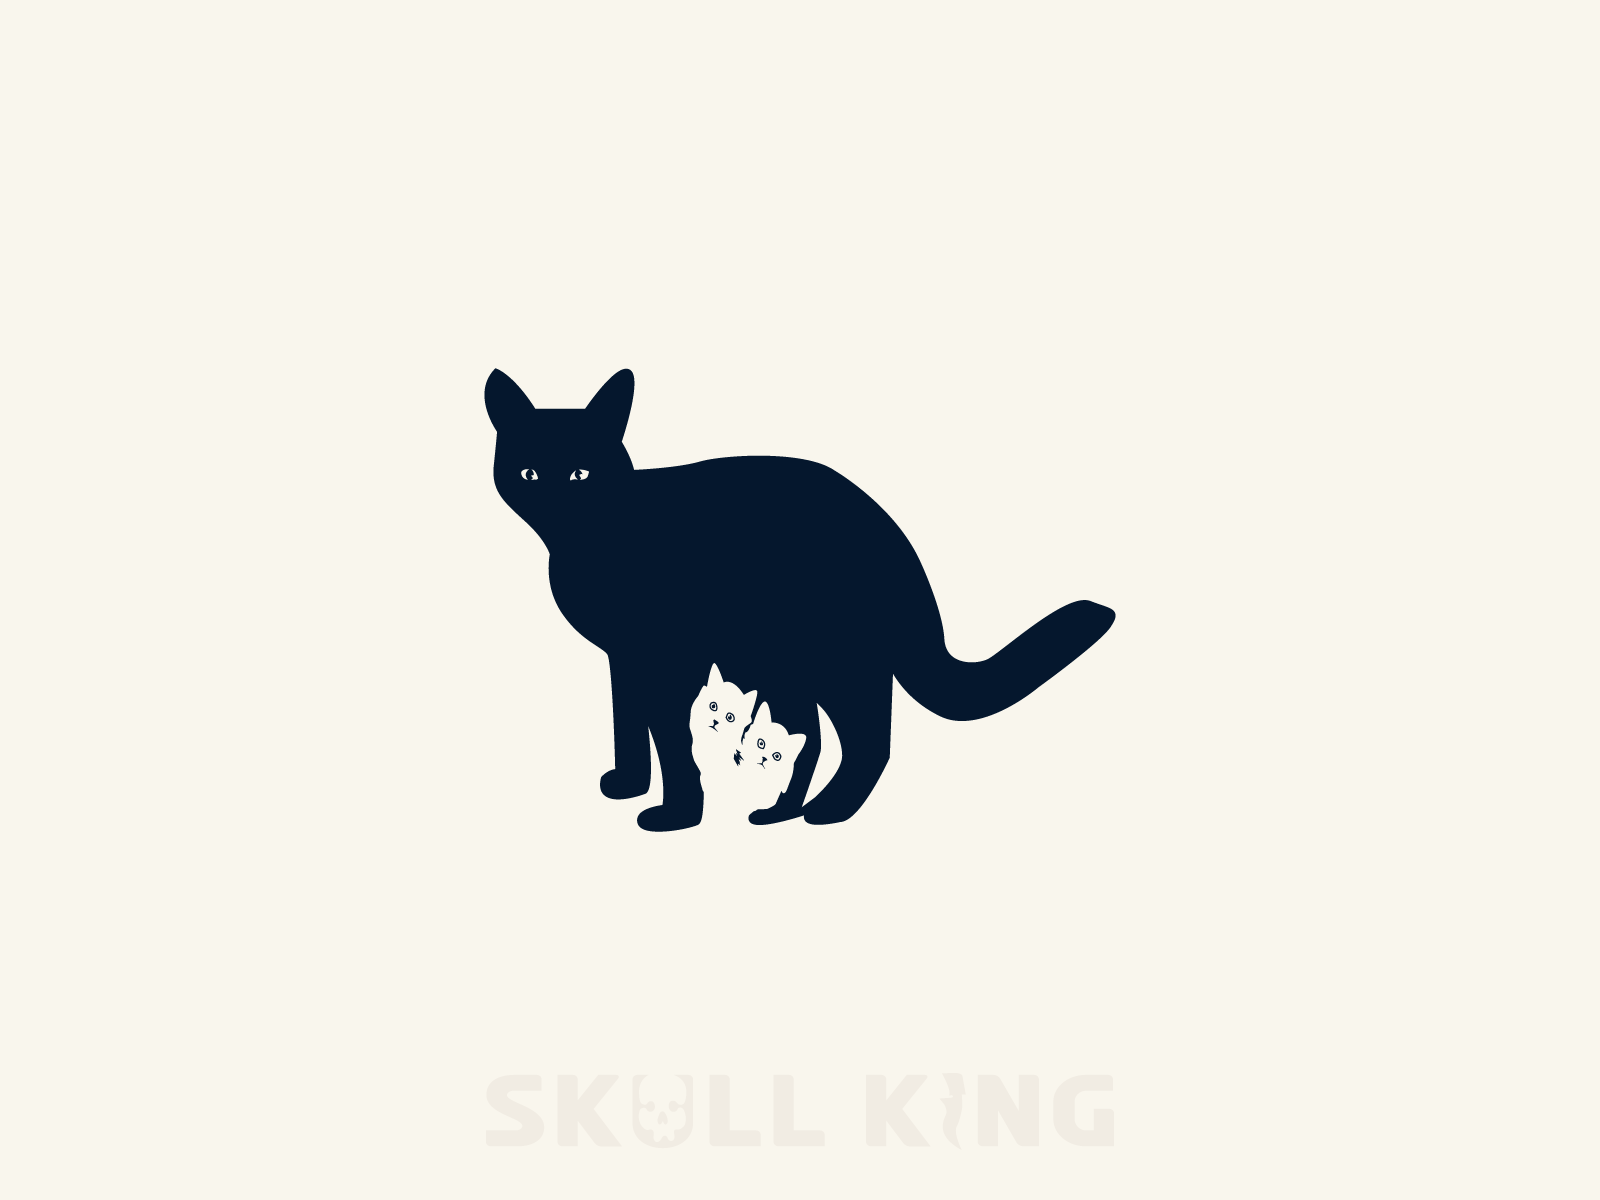 Cats! black and white cat cat illustration cat lover cat lovers cats character ink inktober inktober 2017 inktober 2018 inktober 2019 inktober 2020 inktober 2021 inktober 2022 meow pussy scurry sketching vectober